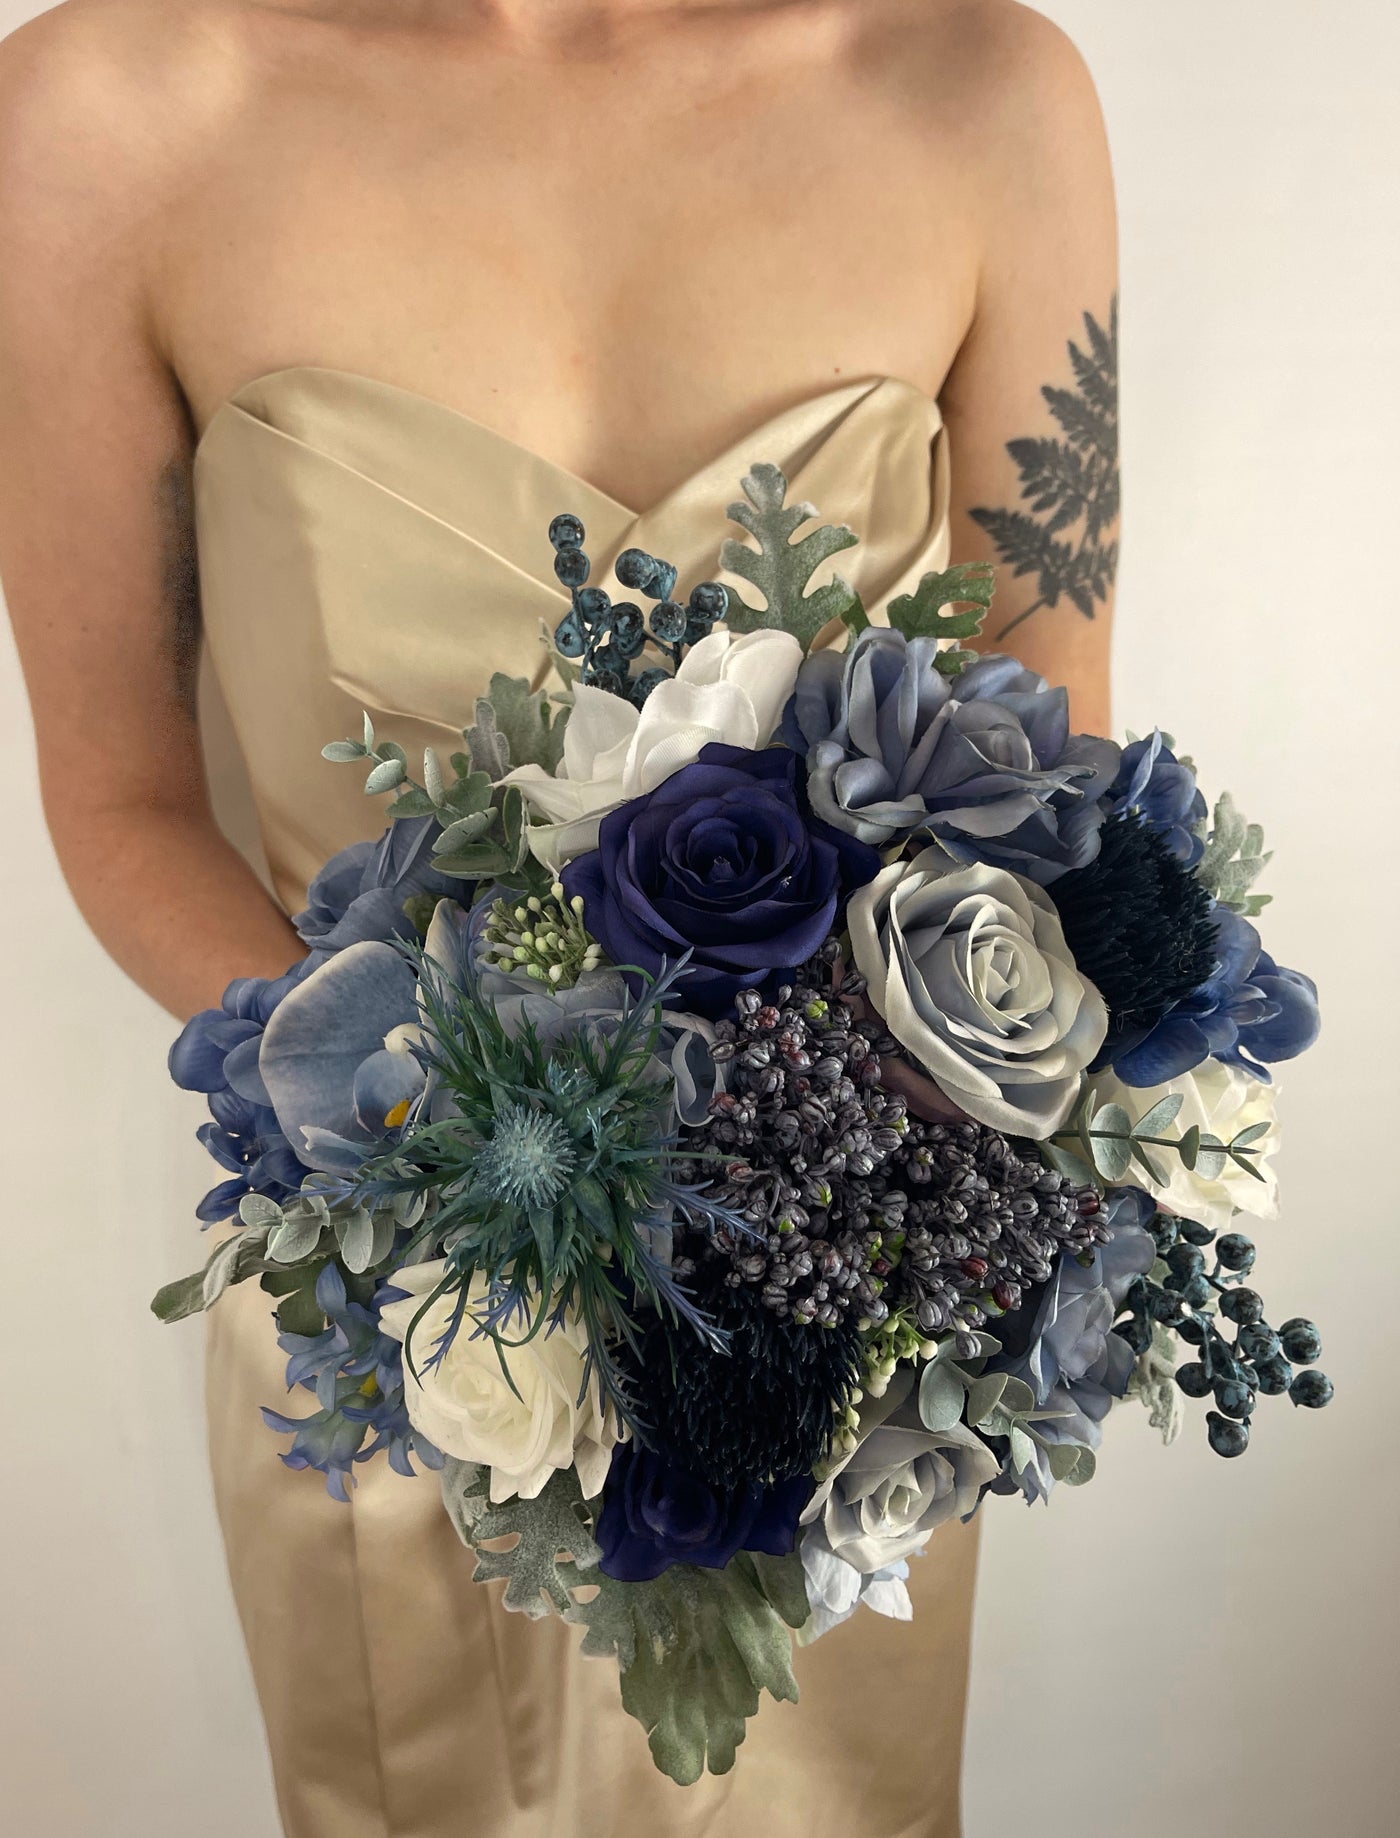 Blue bridesmaid bouquet being held by woman in champaign  coloured dress.